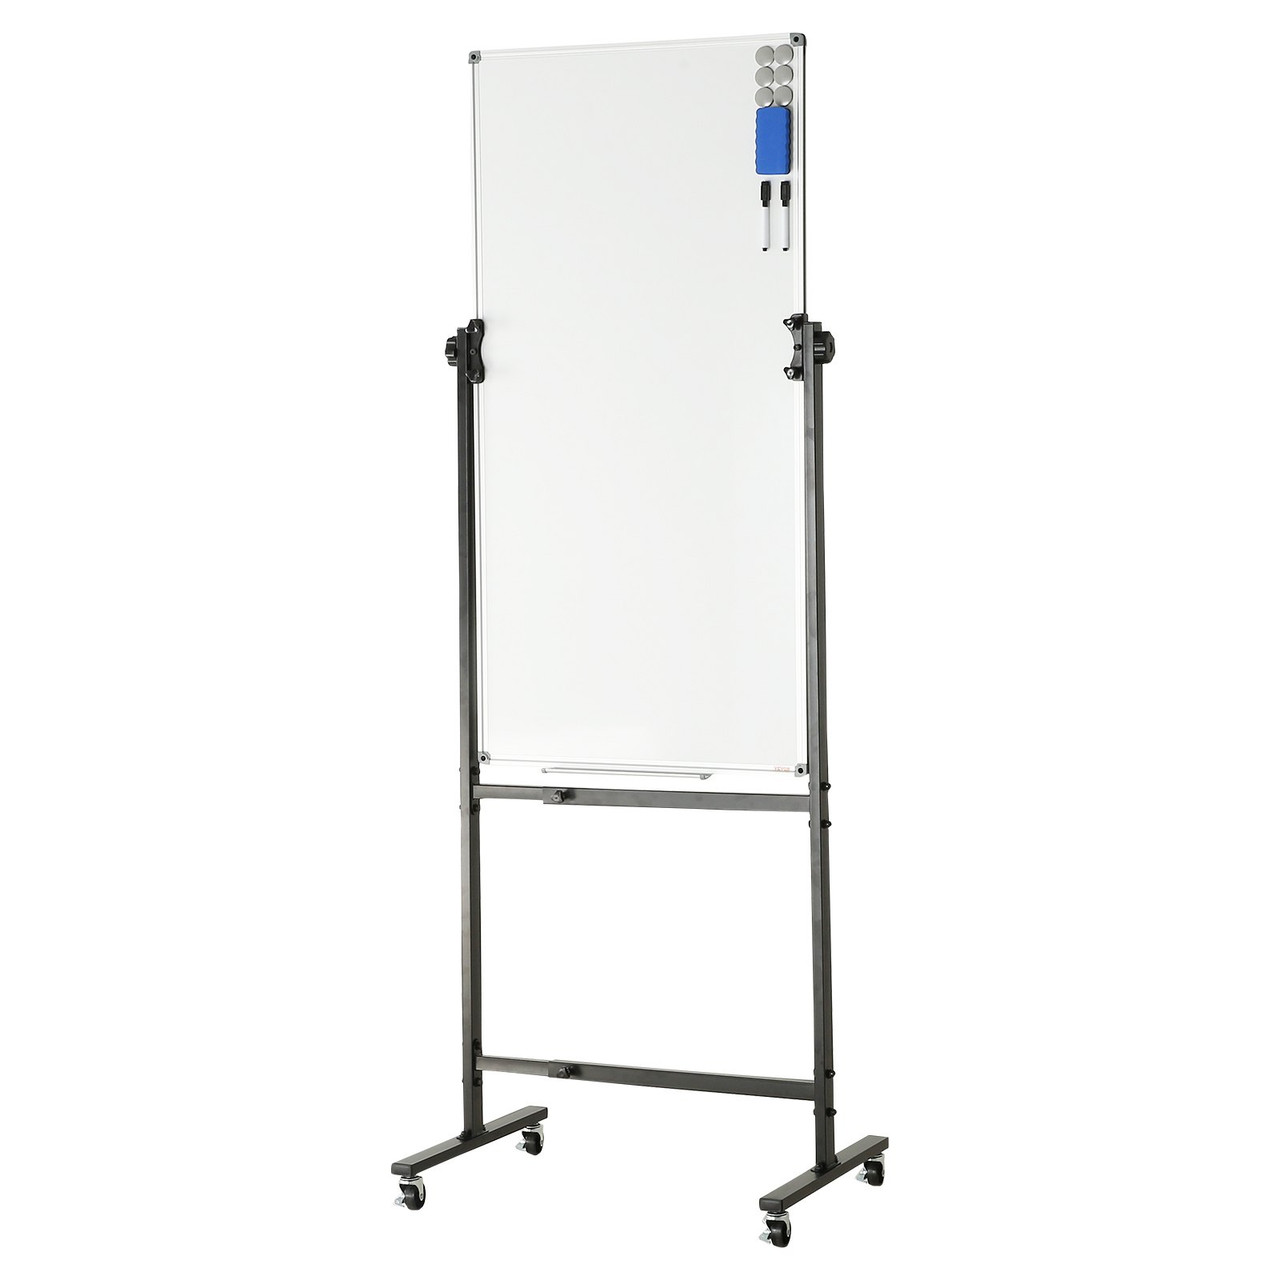 Rolling Magnetic Whiteboard, Double-sided Mobile Whiteboard 24x48 Inches, Adjustable Height Dry Erase Board with Wheels, 1 Magnetic Erase & 3 Dry Erase Markers & Movable Tray for Office School